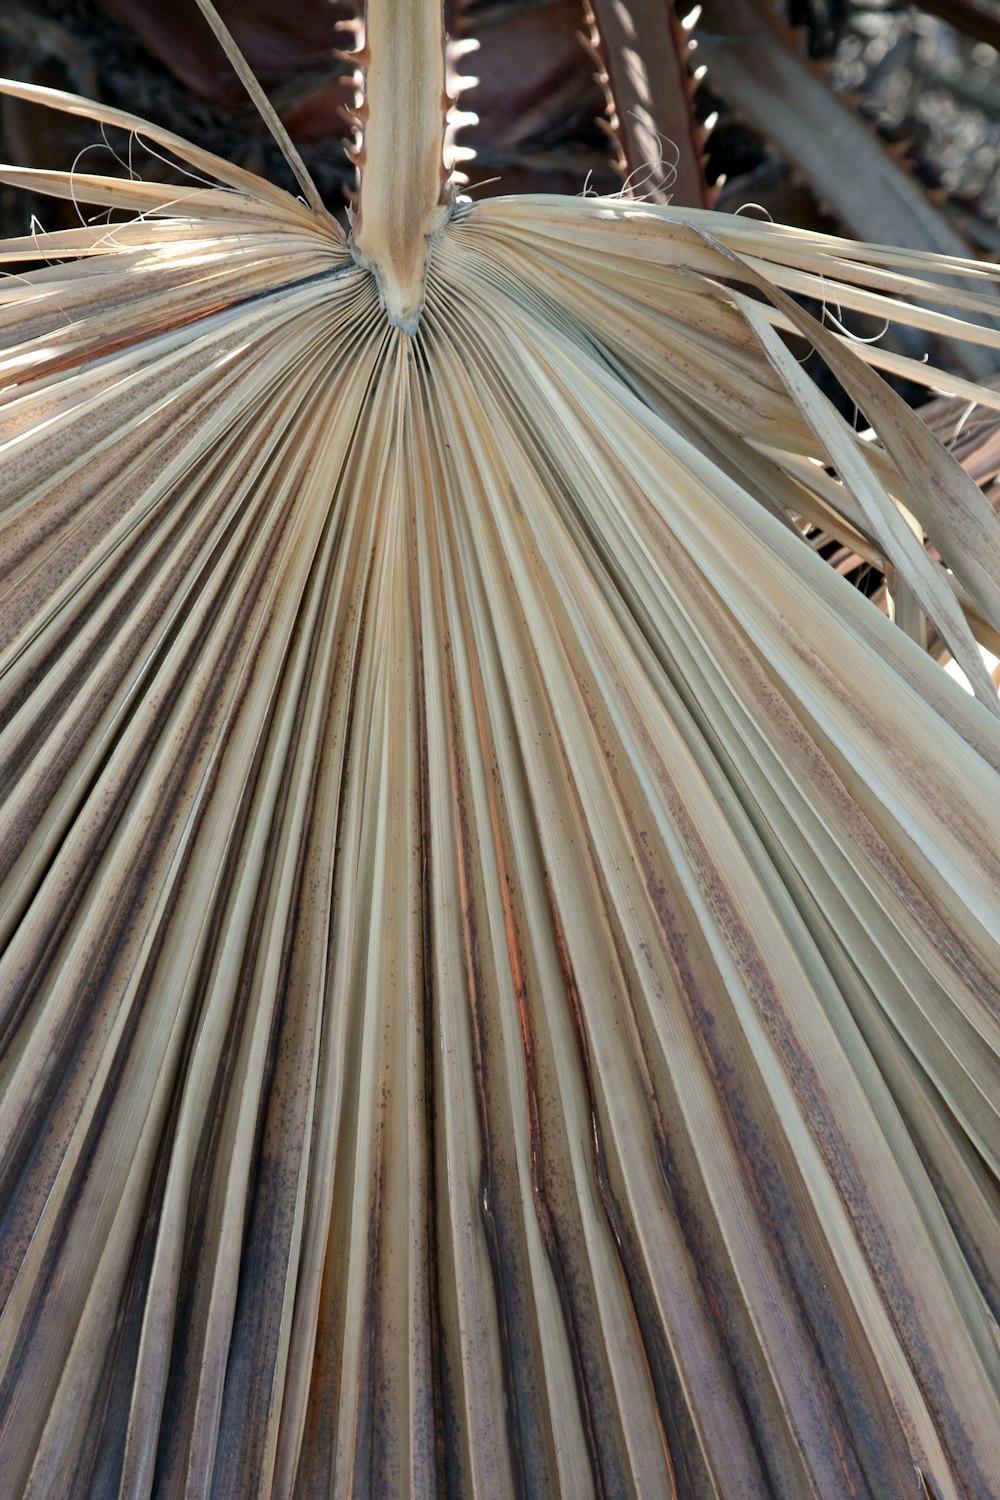 a close up view of a palm tree